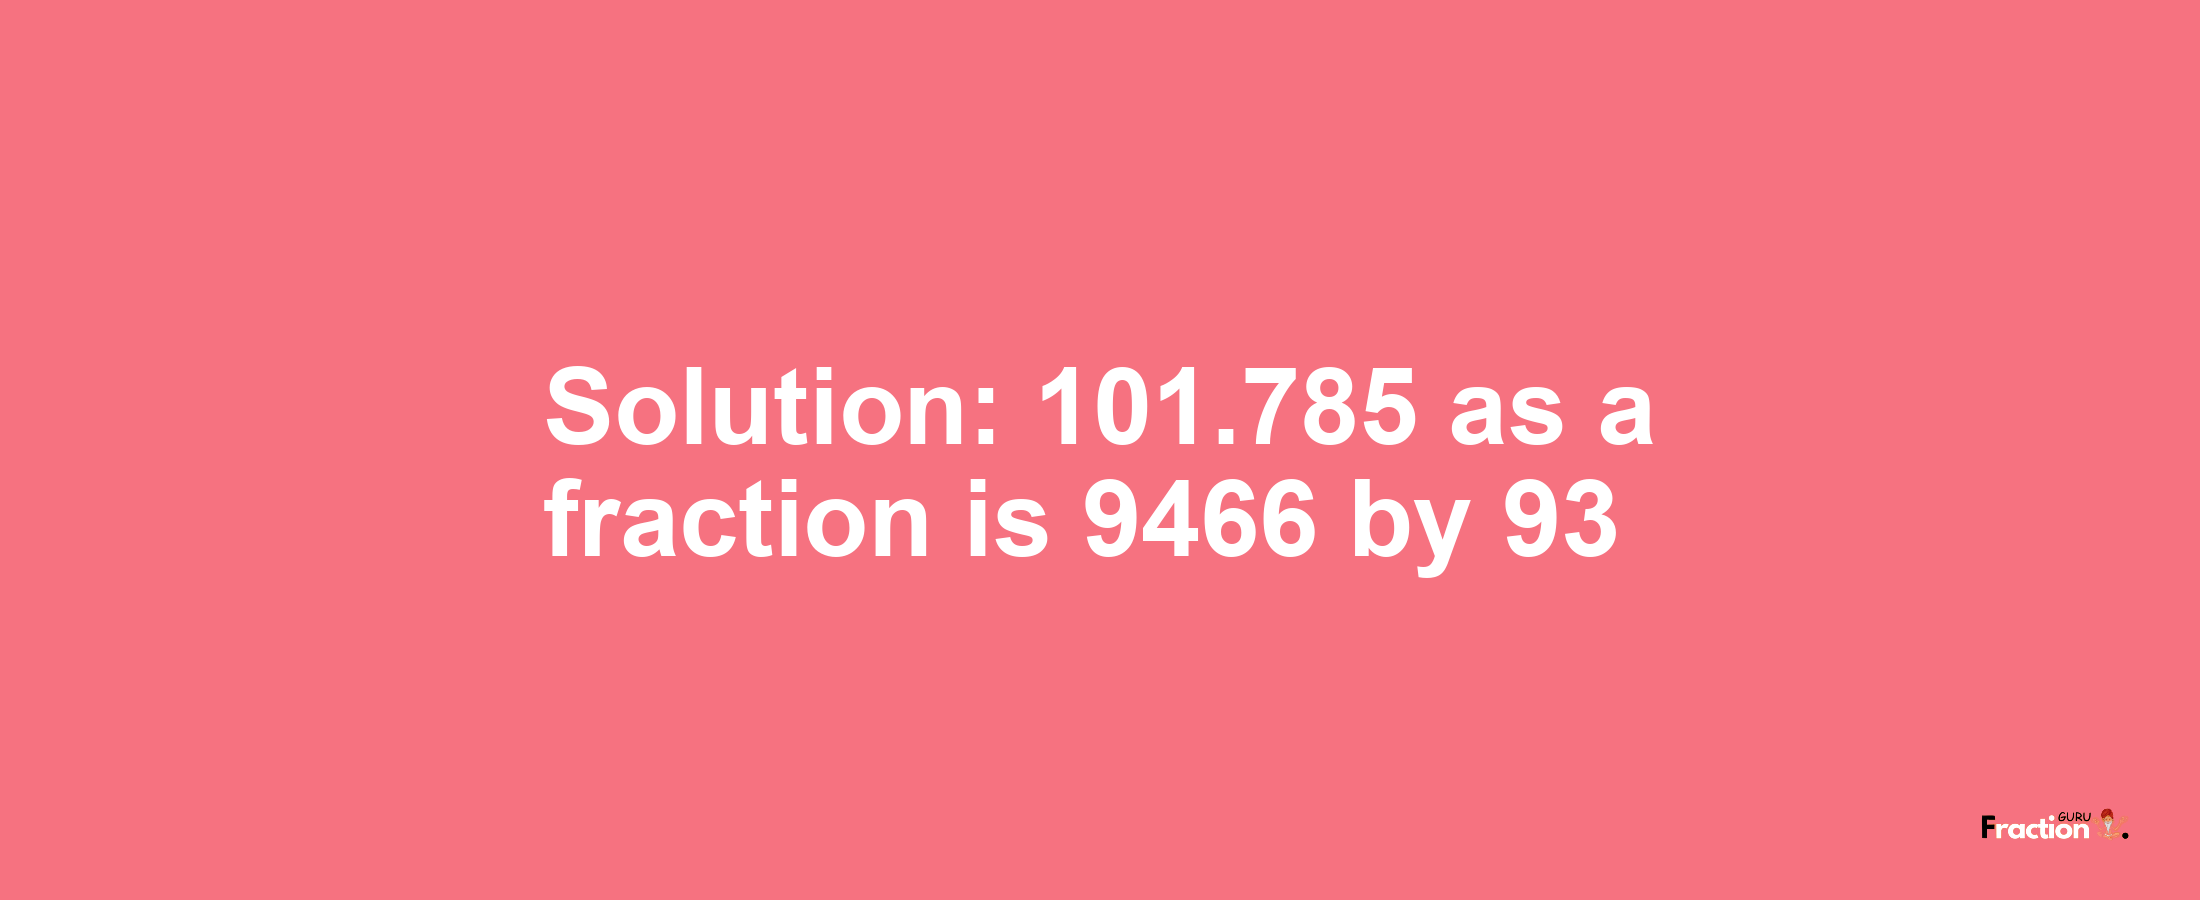 Solution:101.785 as a fraction is 9466/93